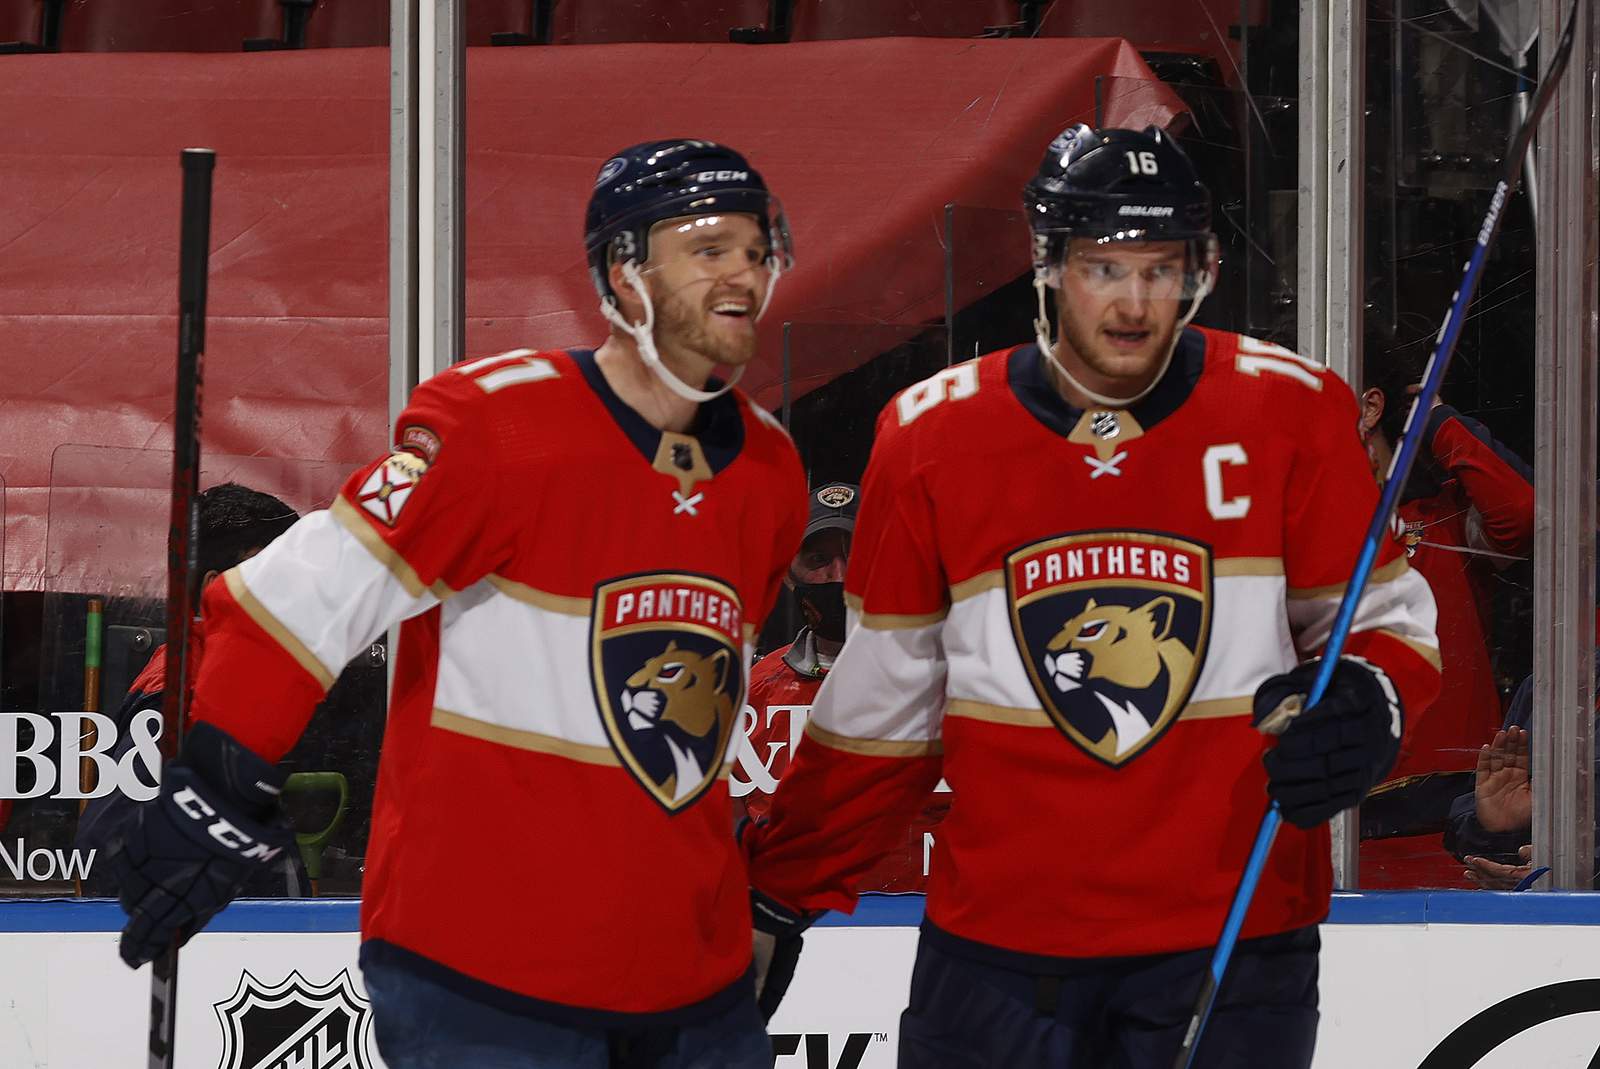 Barkov’s short-handed goal leads first place Panthers over Blackhawks